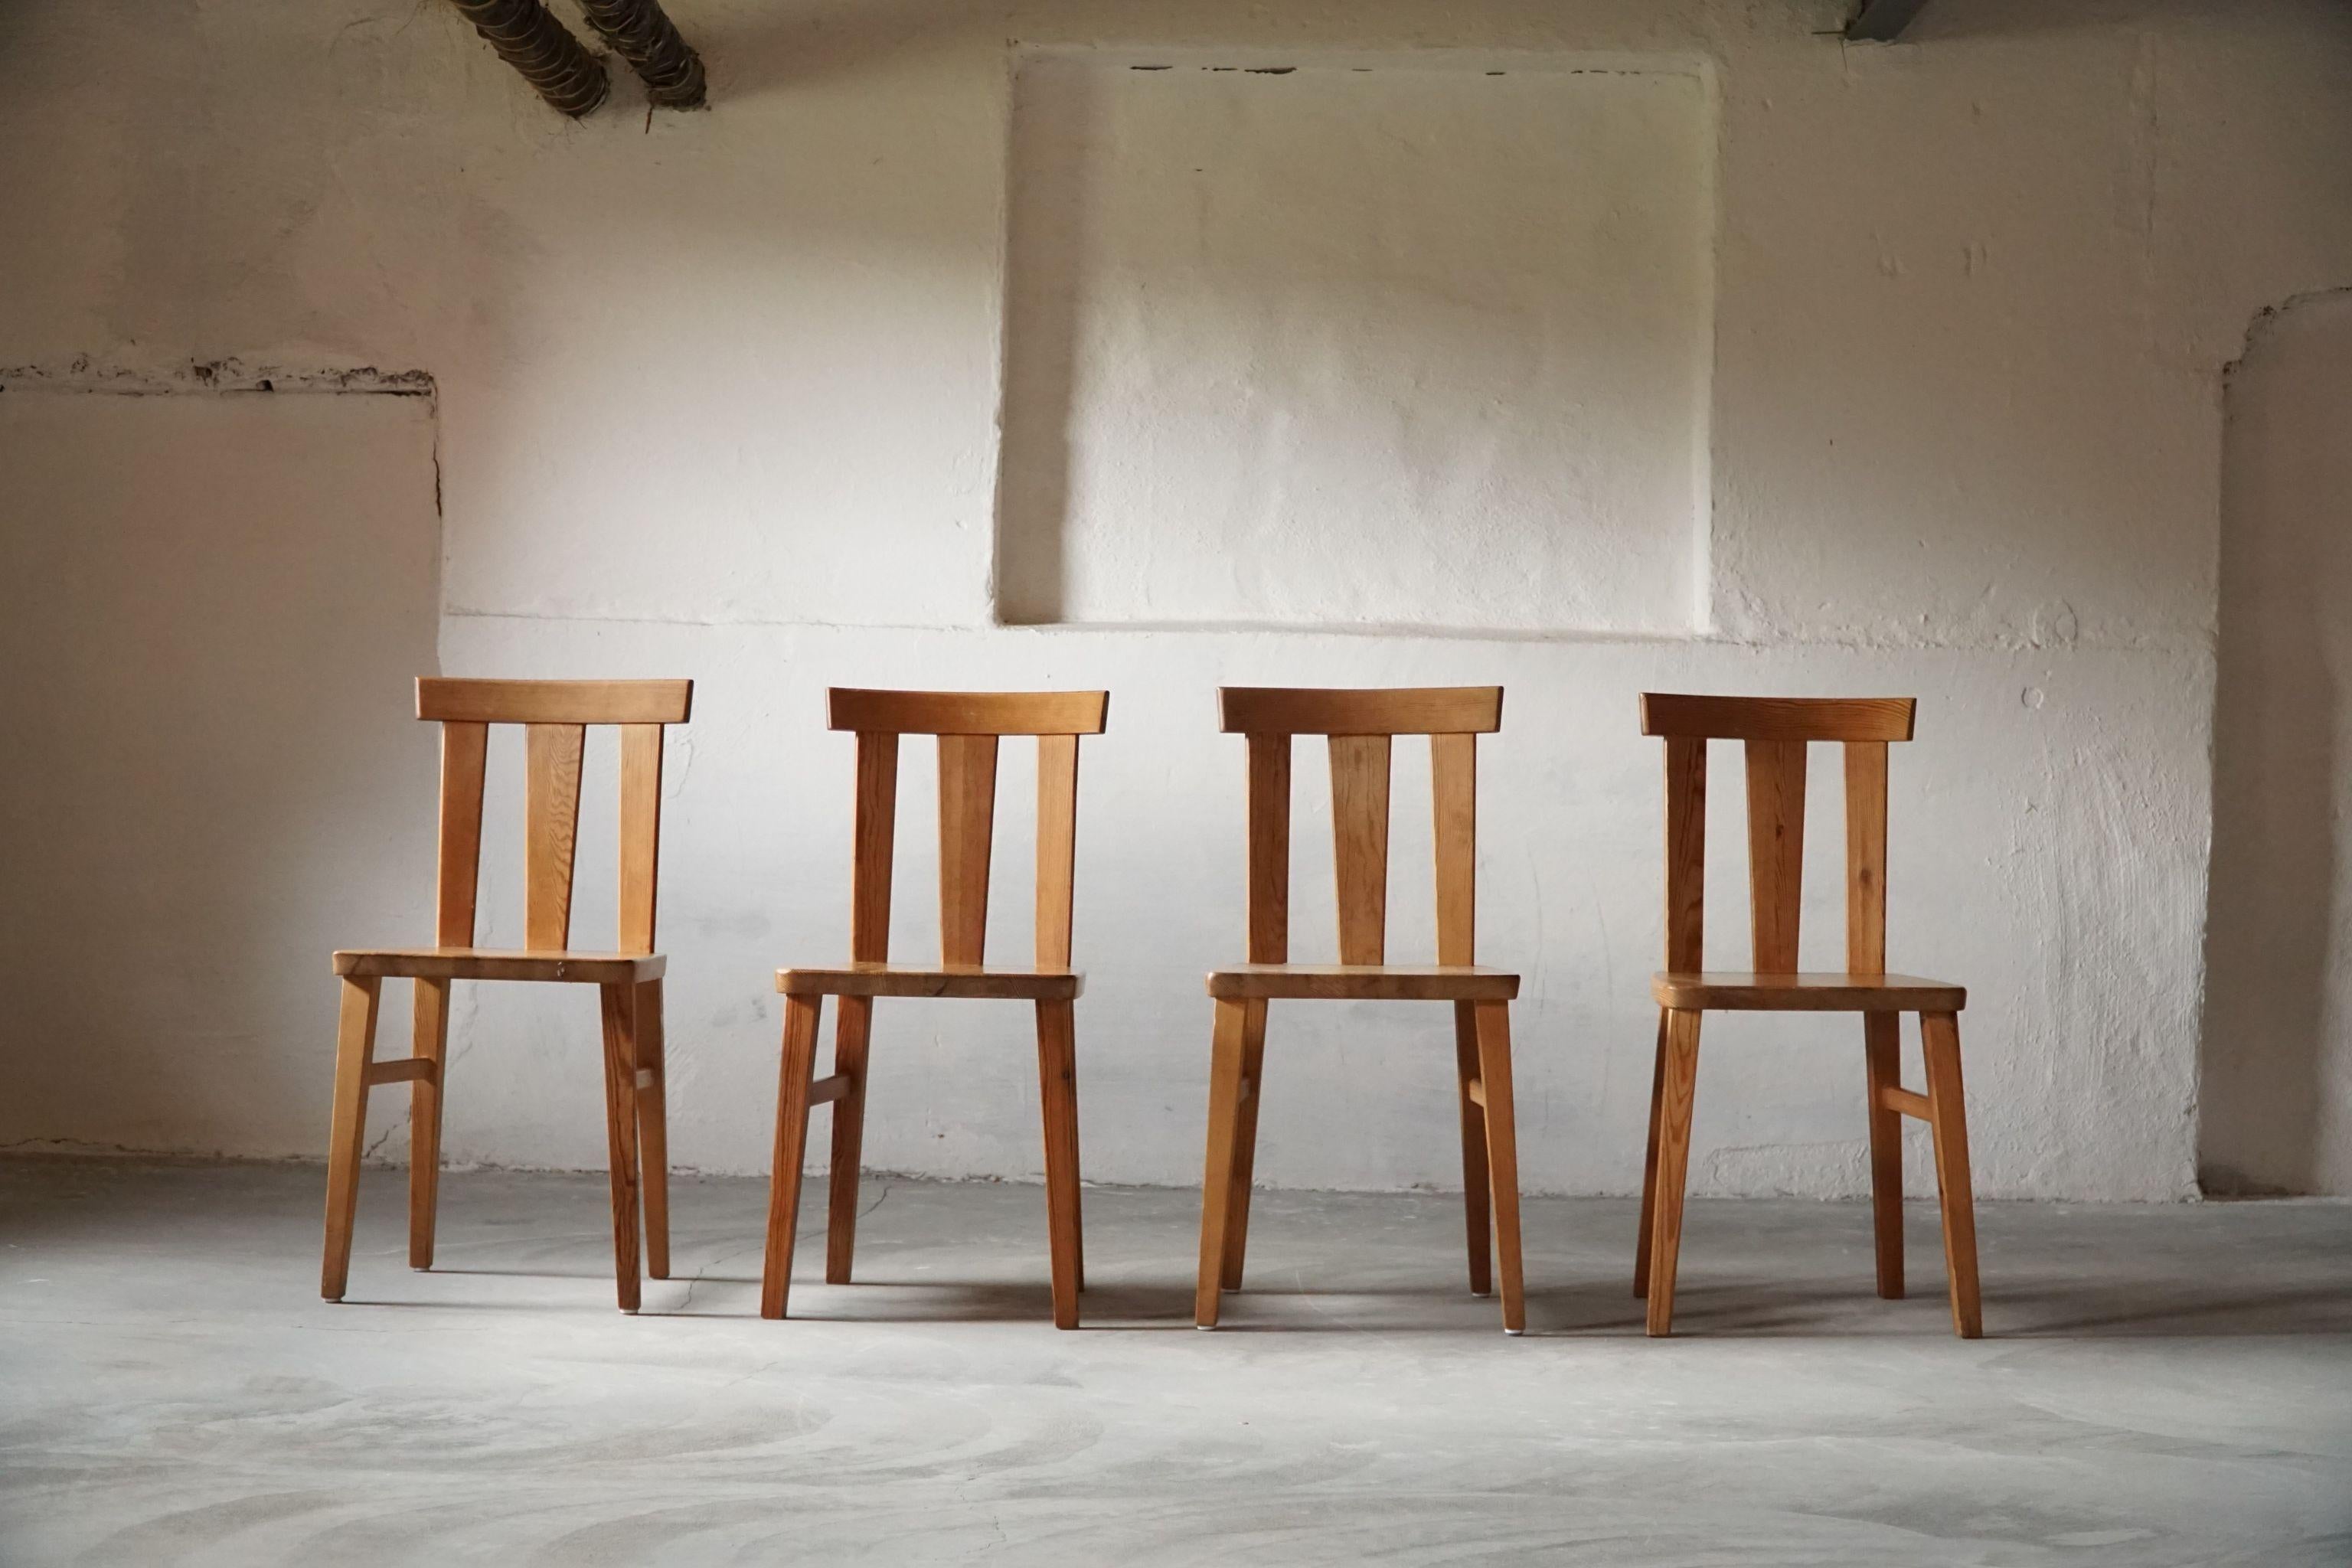 Hand-Crafted Set of 4 Swedish Modern Chairs in Solid Pine, Axel Einar Hjorth Style, 1930s